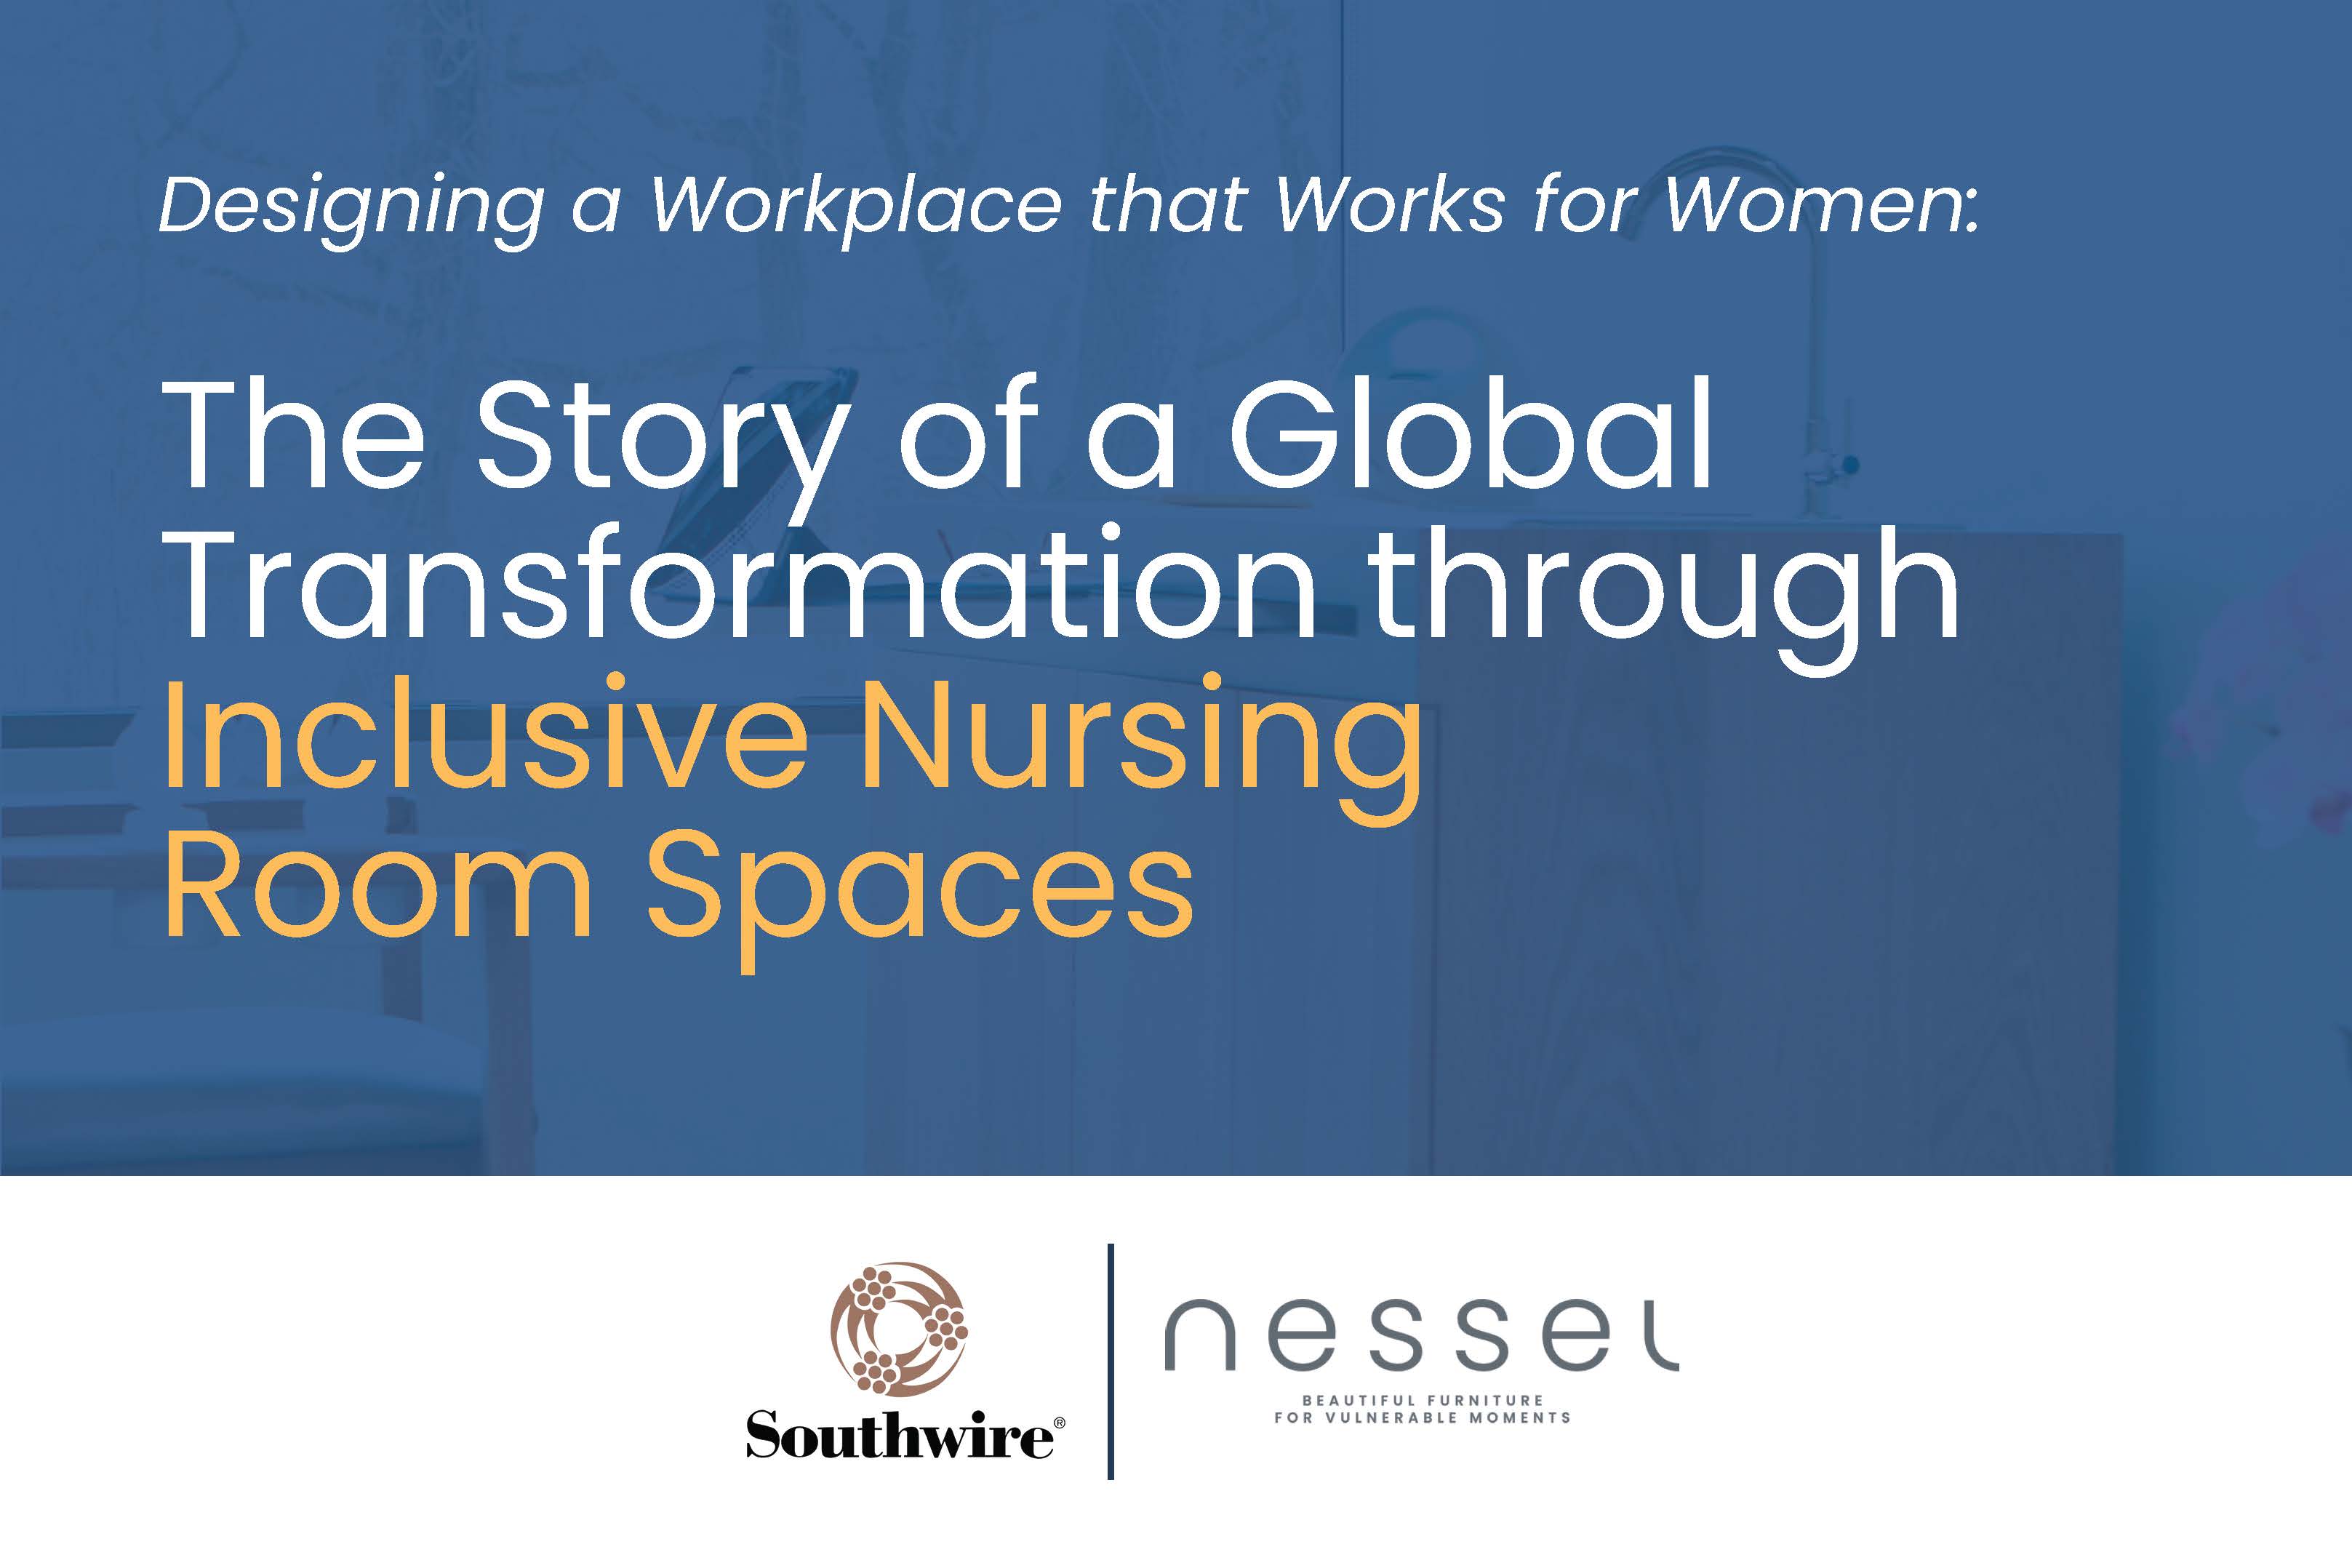 Designing Workplaces that Work for Women – Southwire Partners with Nessel to Create Nursing Room Spaces at Facilities Across the Organization